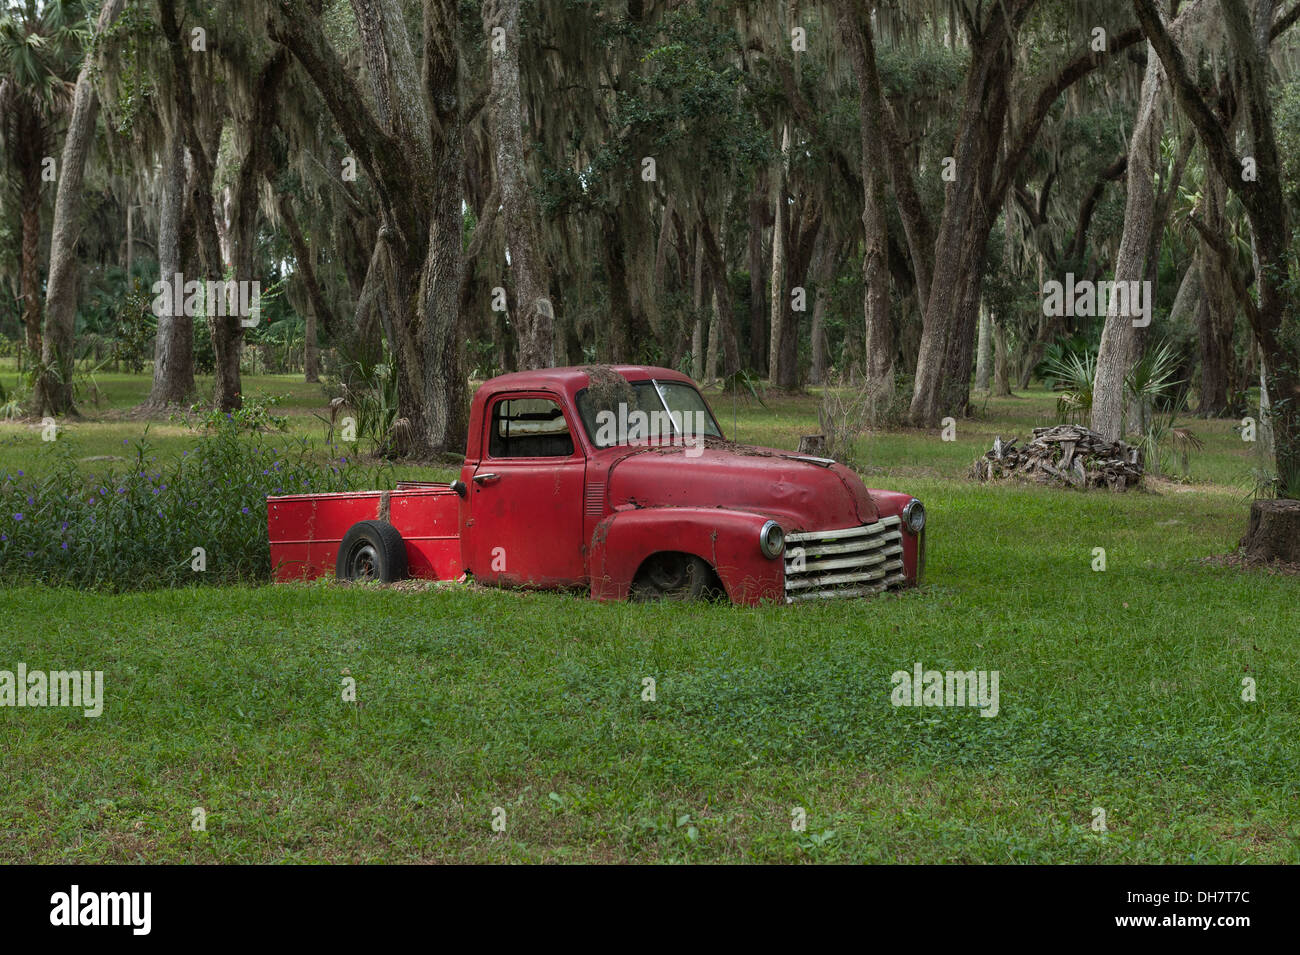 An old Chevrolet pickup truck being use as decoration on private property in Leesburg, Florida USA Stock Photo